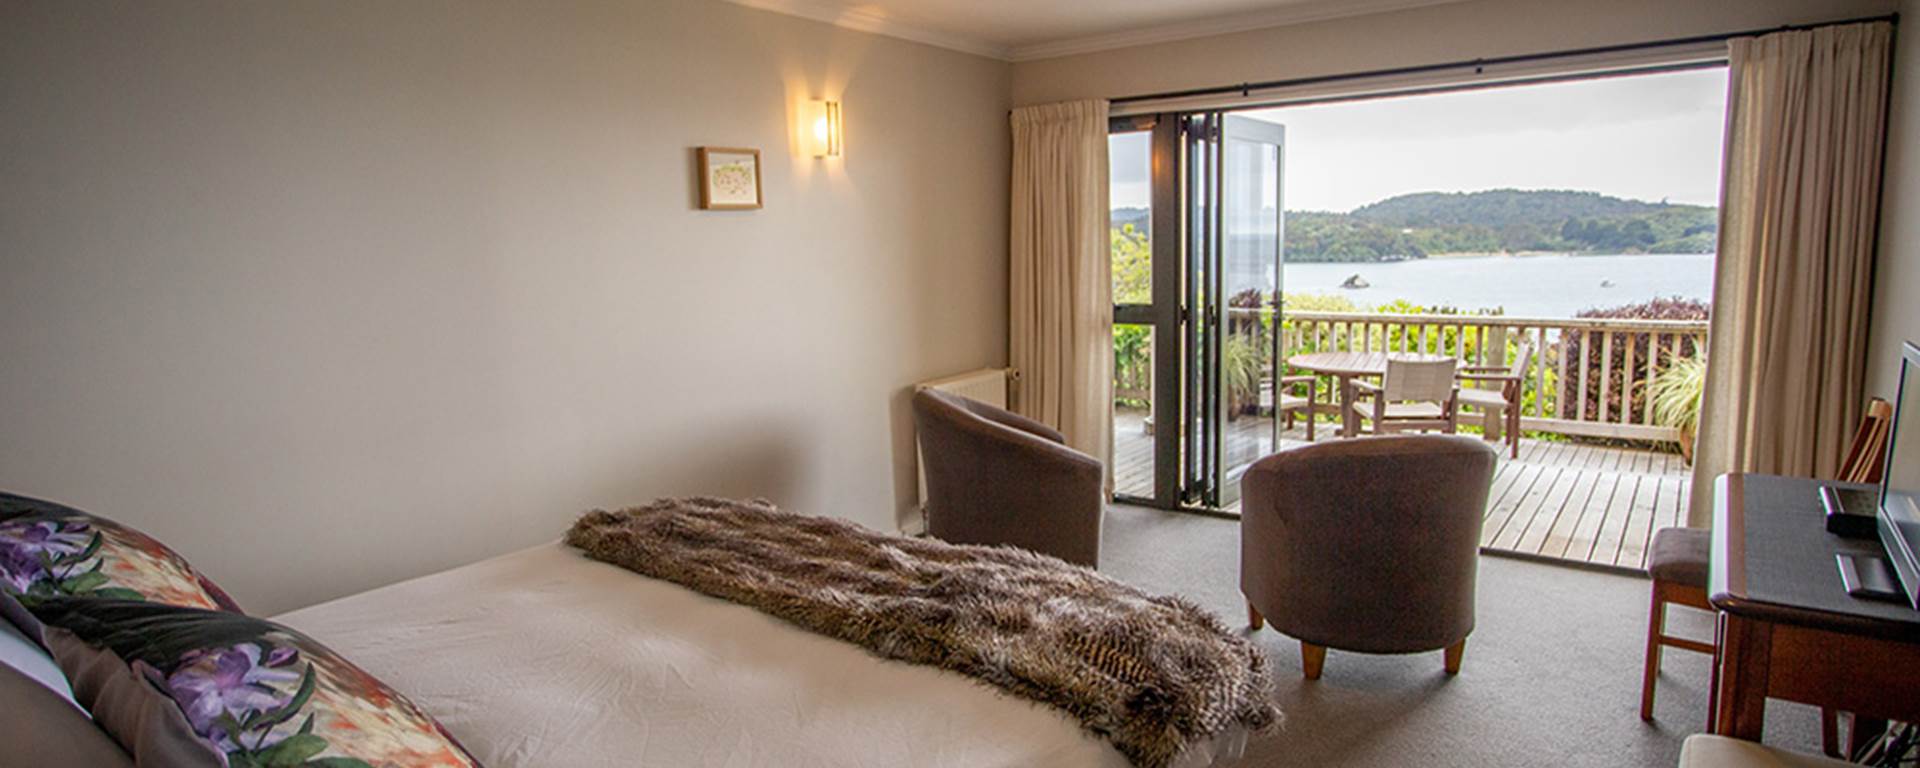 Interior bedroom at the Stewart Island Lodge with doors open on to the balcony